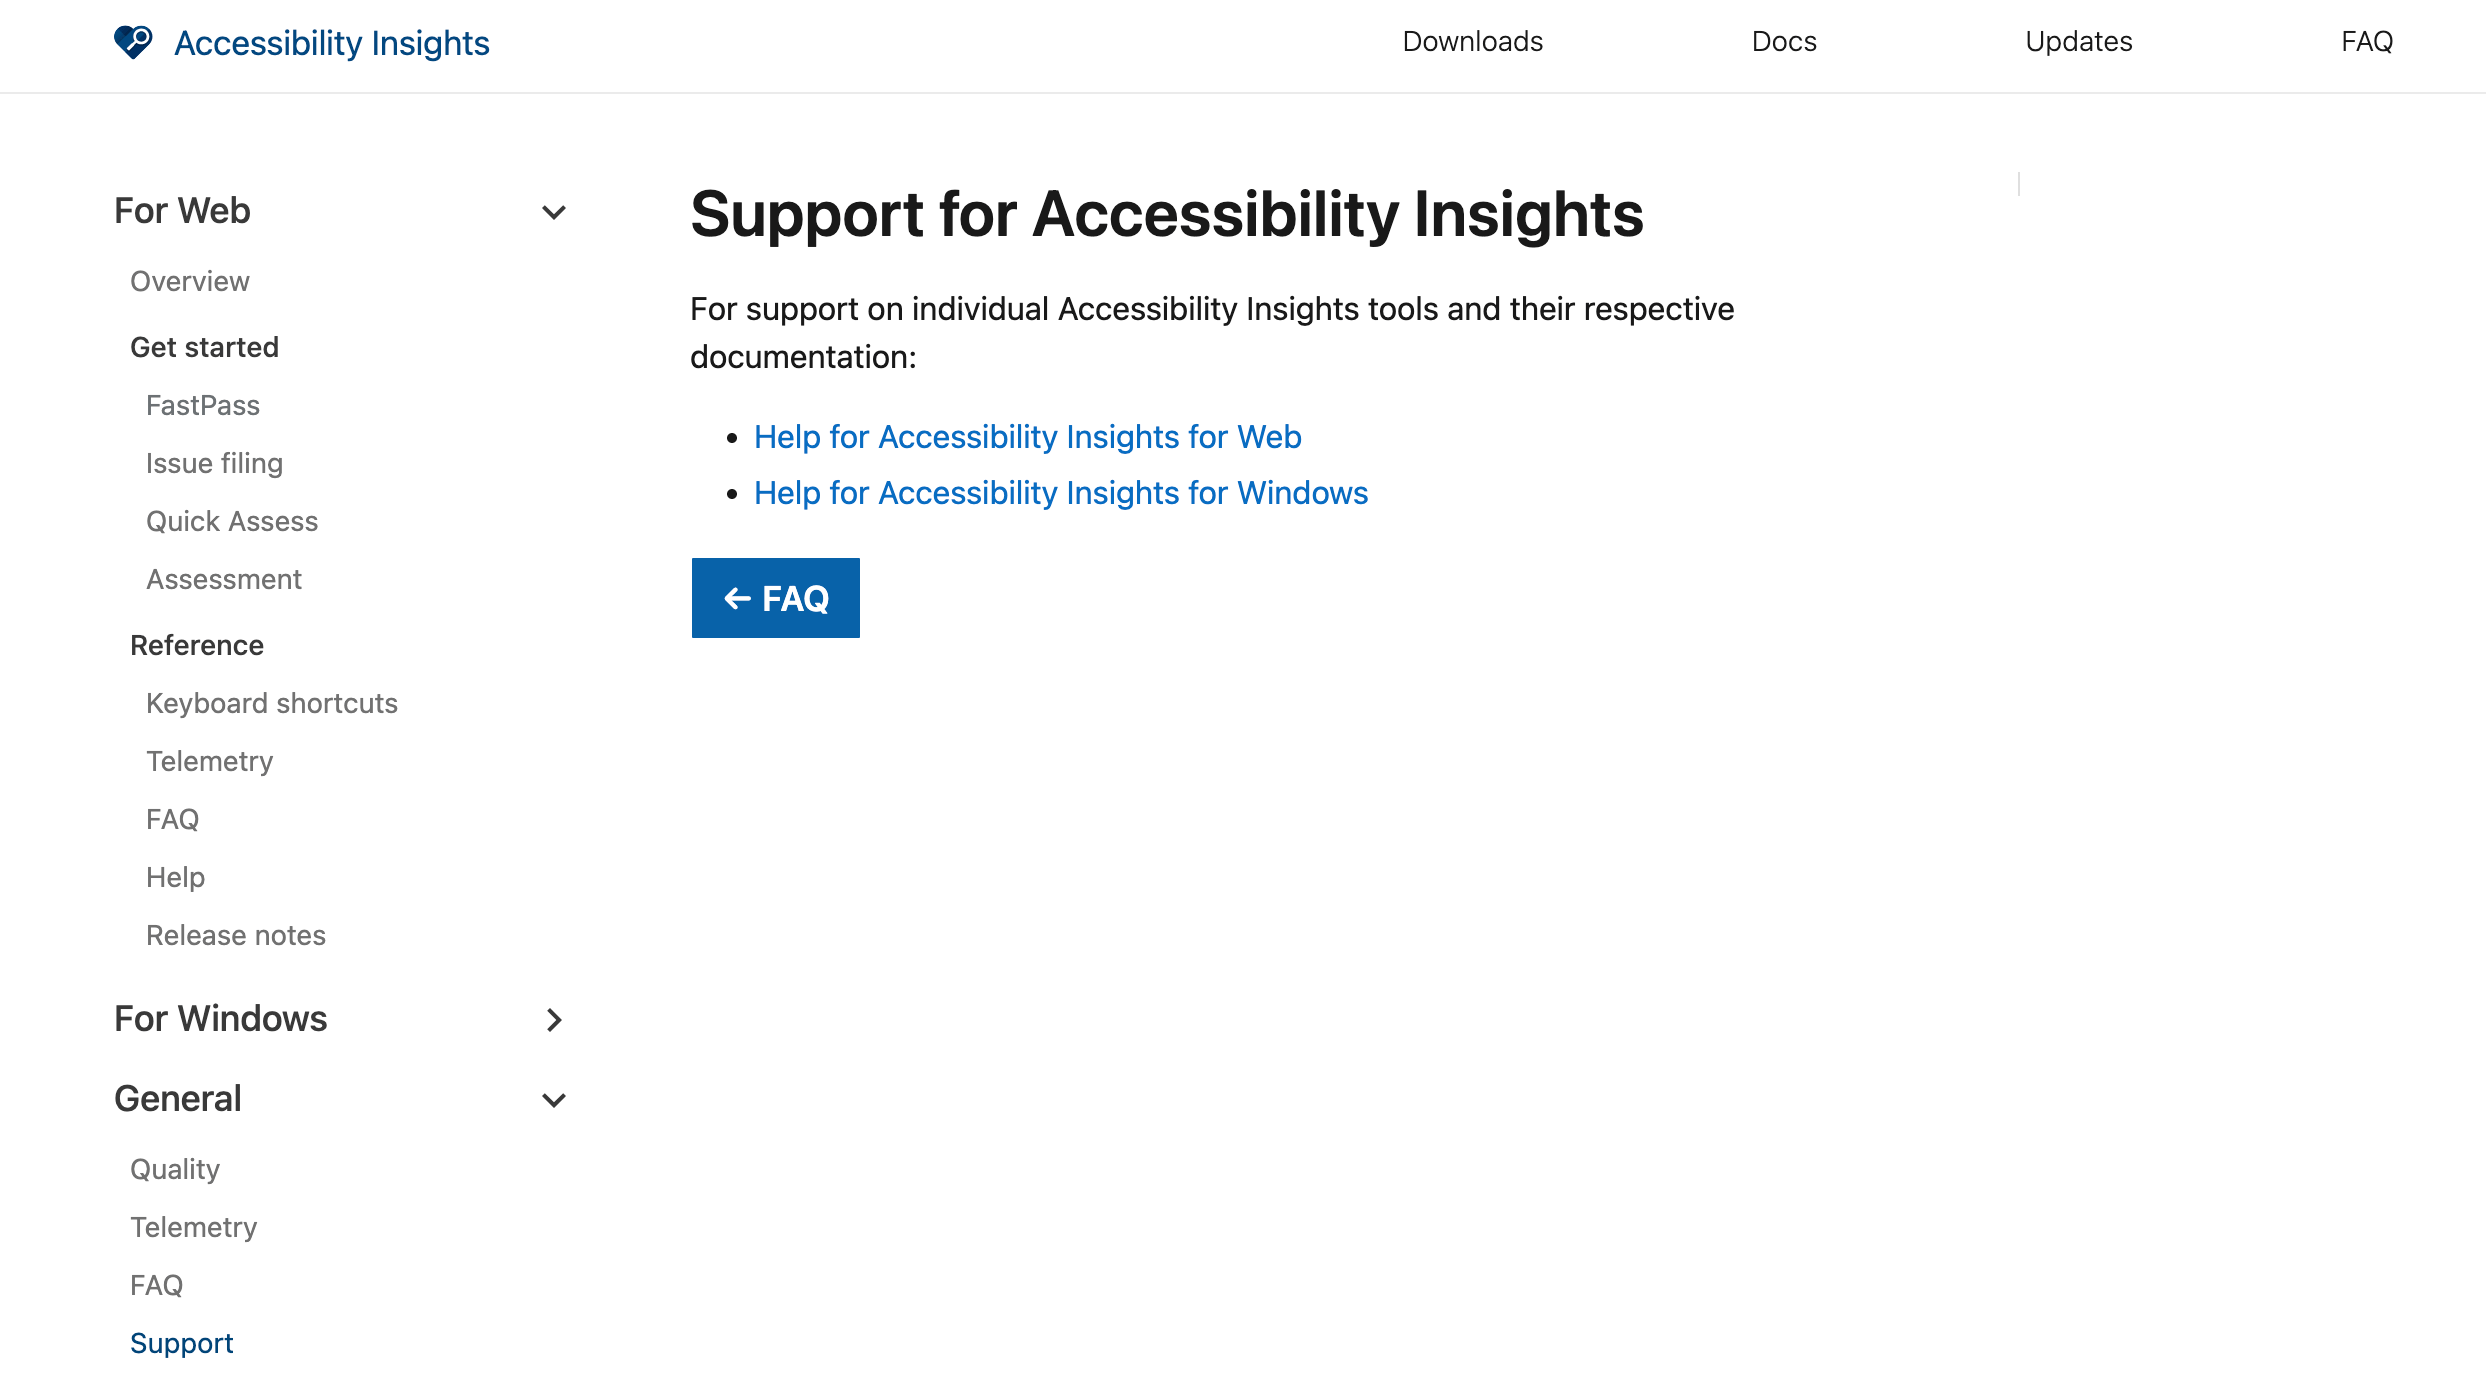 Support offered by Accessibility Insights